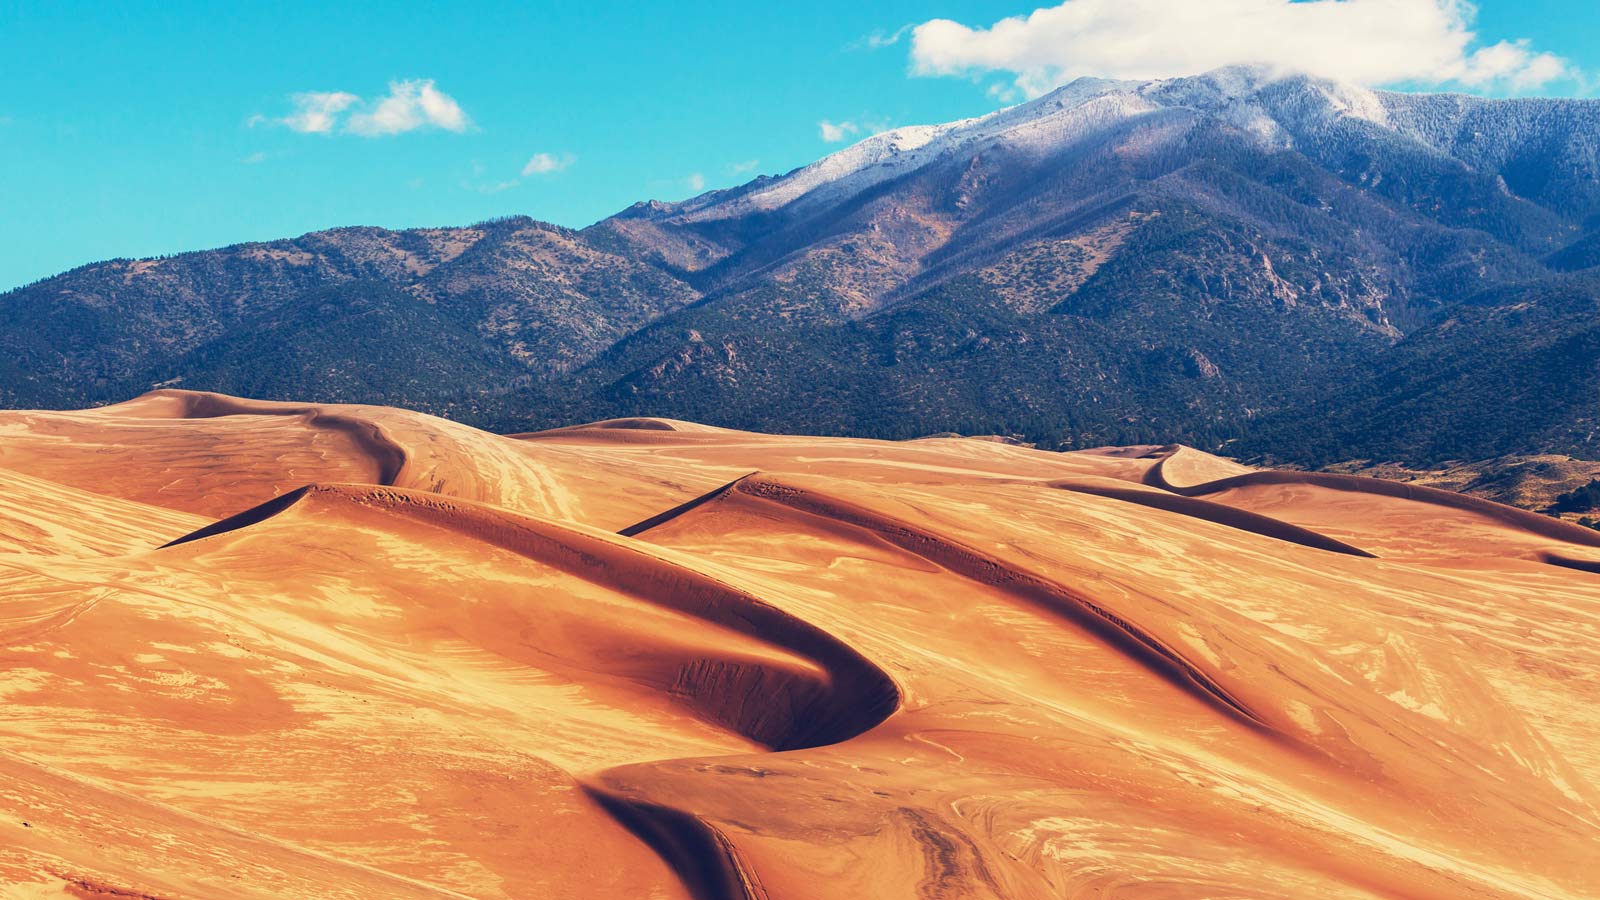 <p>We know, we know. Colorado is known for snowboarding, but have you ever tried its summer sister sport, sandboarding? Luckily, you can try it out (or do it again) at <a href="https://www.nps.gov/grsa/index.htm" rel="nofollow noopener">Great Sand Dunes National Park and Preserve</a>.</p><p>Despite the change in weather, the concept of sandboarding is similar to snowboarding. And you can sandboard anywhere on the dunes, as long as you’re away from the areas with thriving plant life. All you have to do is rent a sandboard and slide your way down the sandy slopes.</p><p>The park is dog-friendly too. Our dog, Sunny, loved playing here.</p>